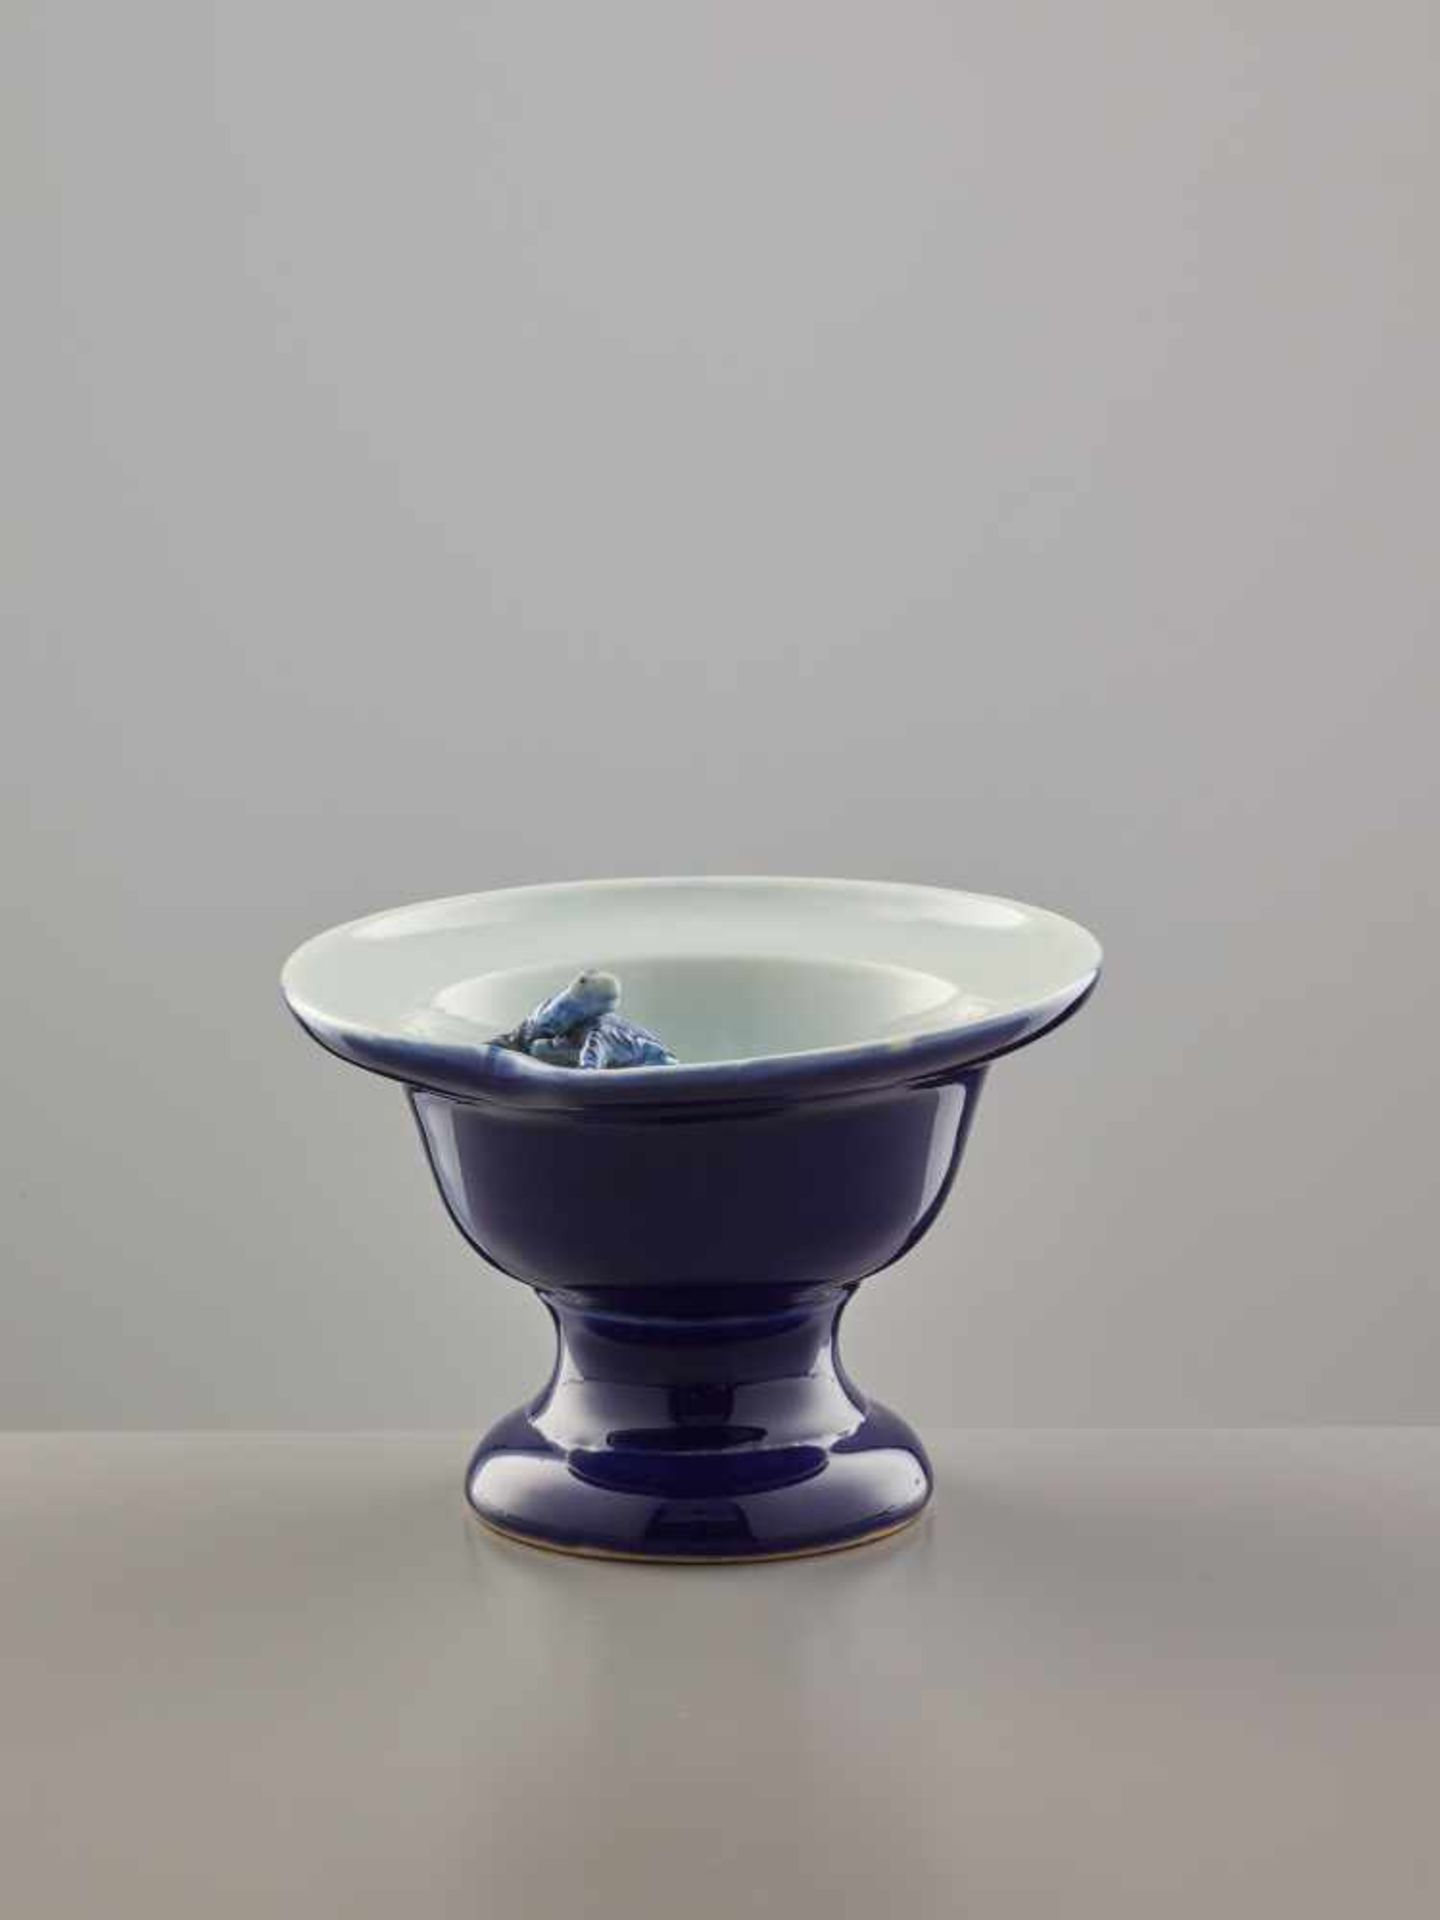 AN AMUSING HIRADO STYLE BLUE AND WHITE PORCELAIN VESSEL WITH AN ESCAPING TORTOISEPorcelainJapan, - Image 5 of 8